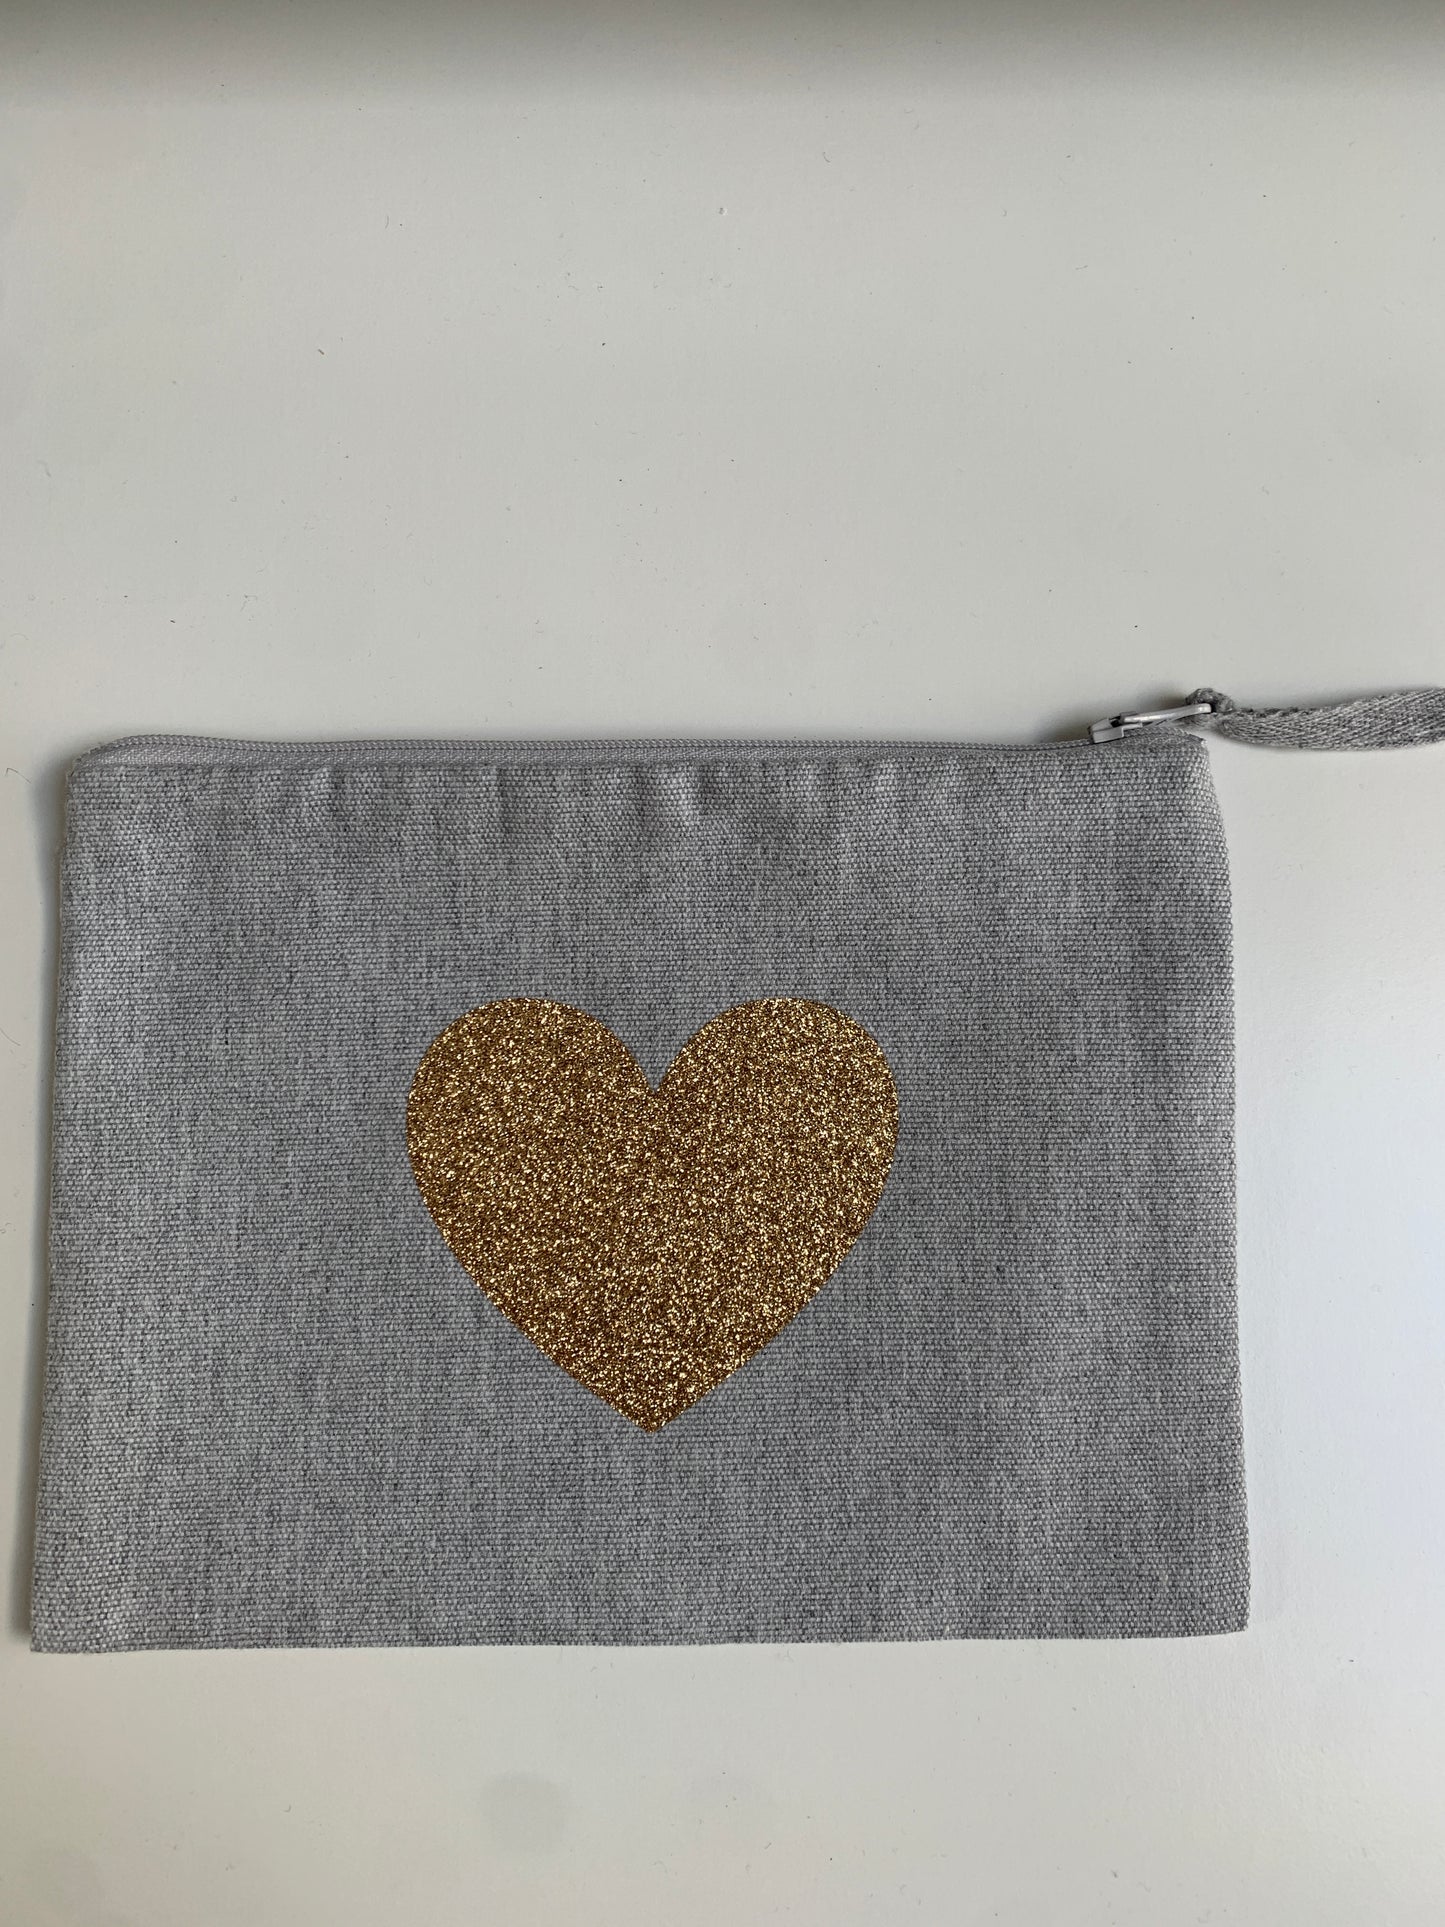 Jimmy Purse Bag Grey with Gold Heart